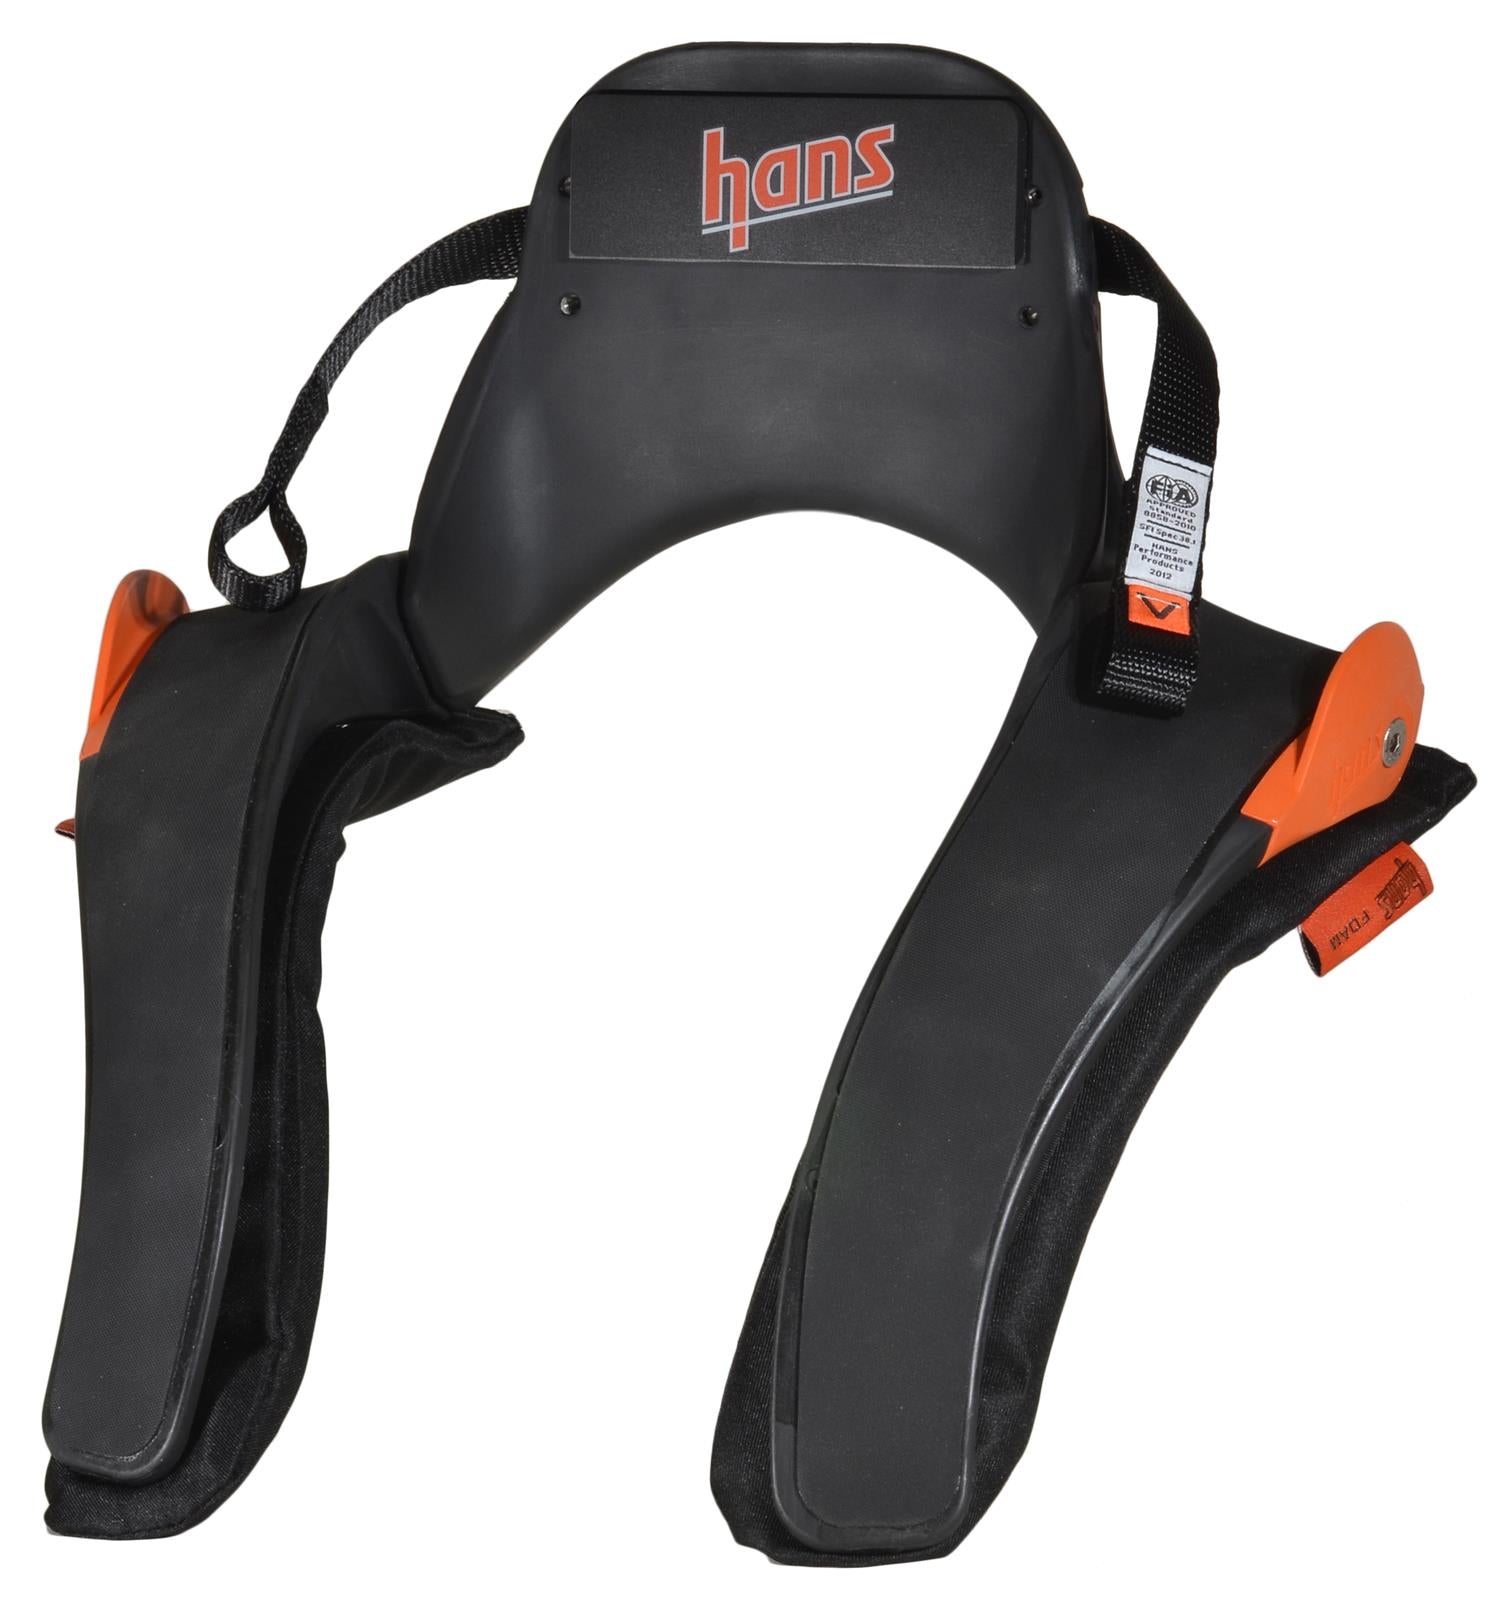 HANS ADJUSTABLE HEAD AND NECK DEVICE - Racing Safety Equipment Supplier in Toronto